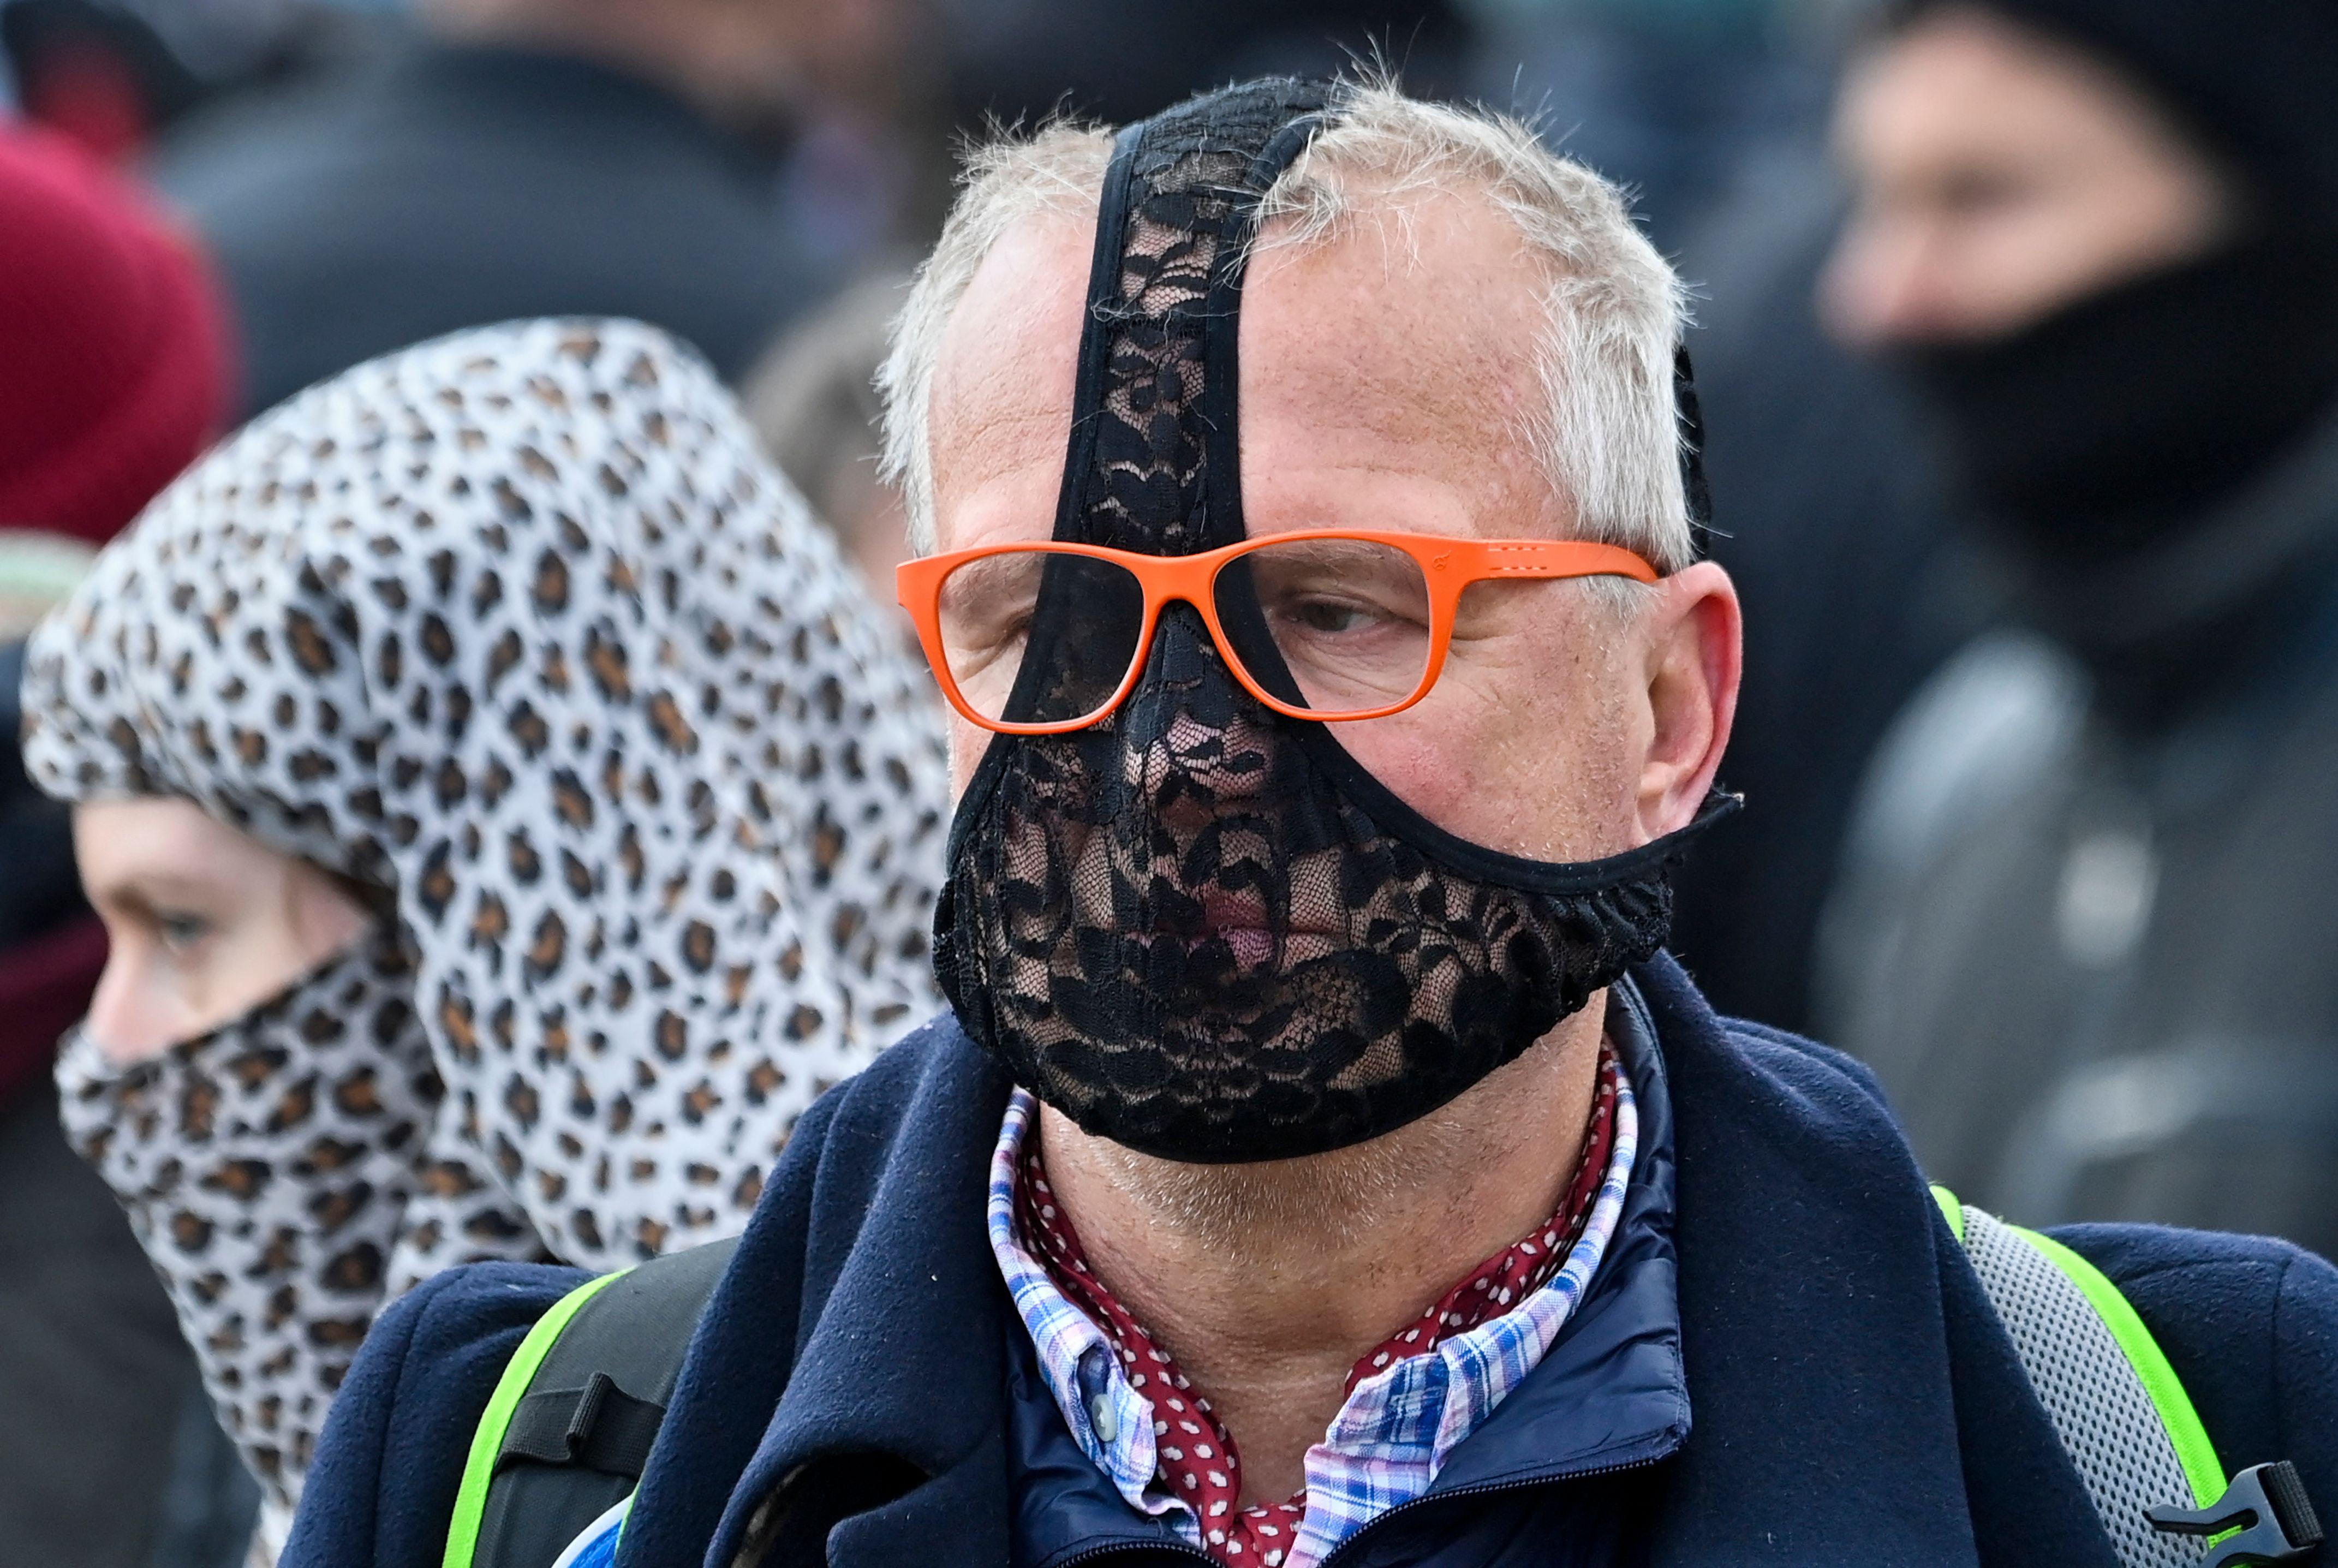 Best photo of the week Underwear face mask at a German anti-lockdown protest. picture